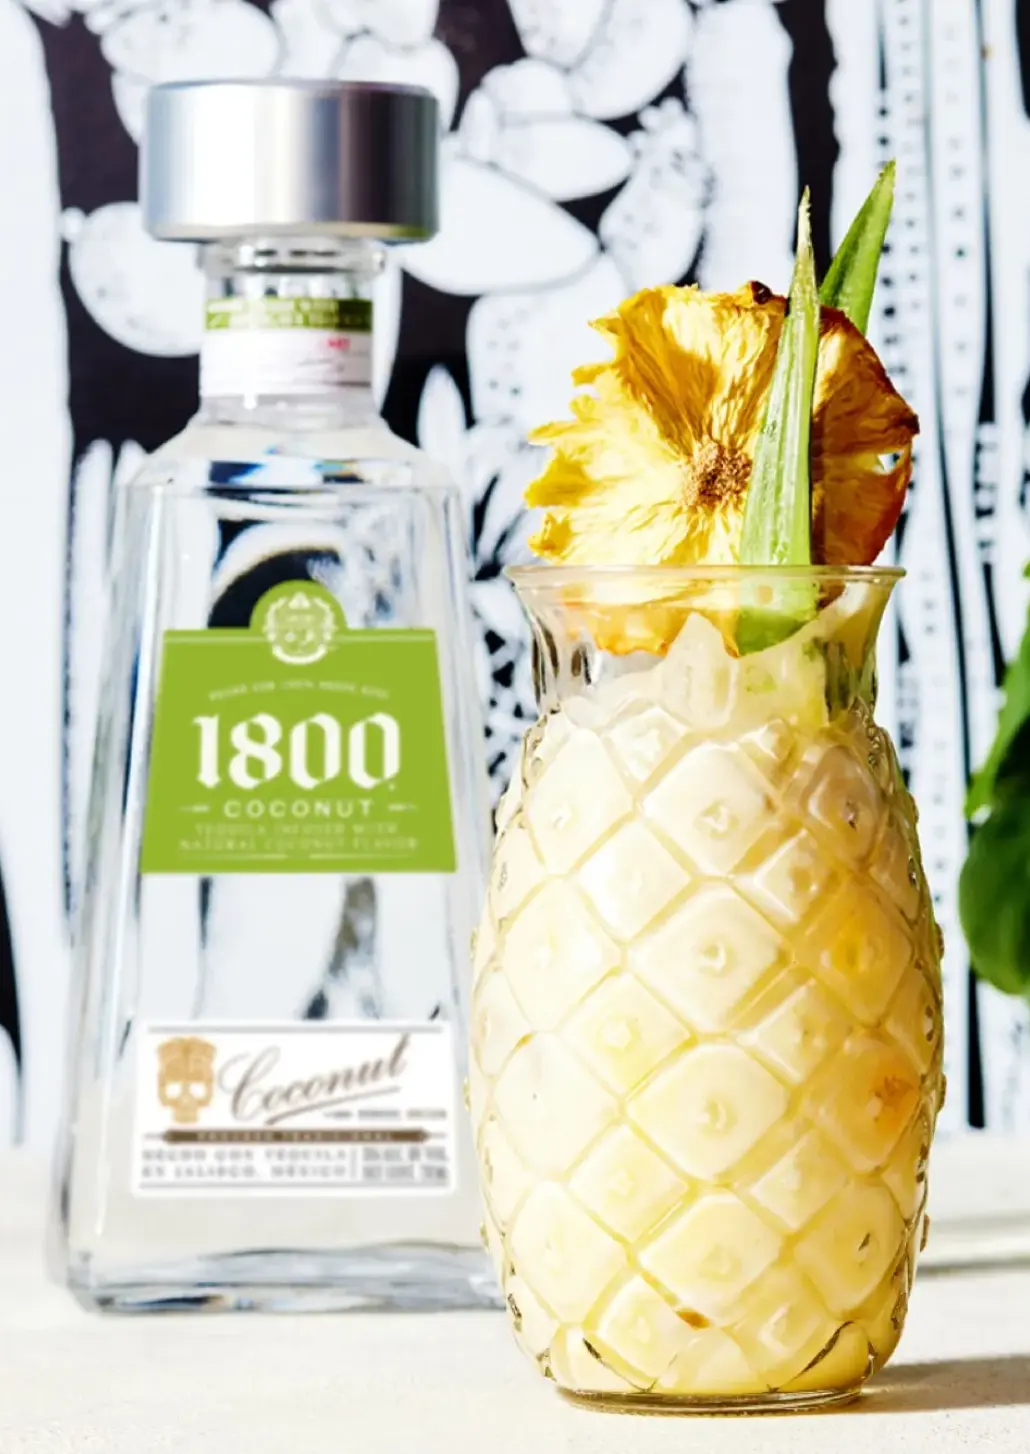 bottle of 1800 coconut and glass of coco colada